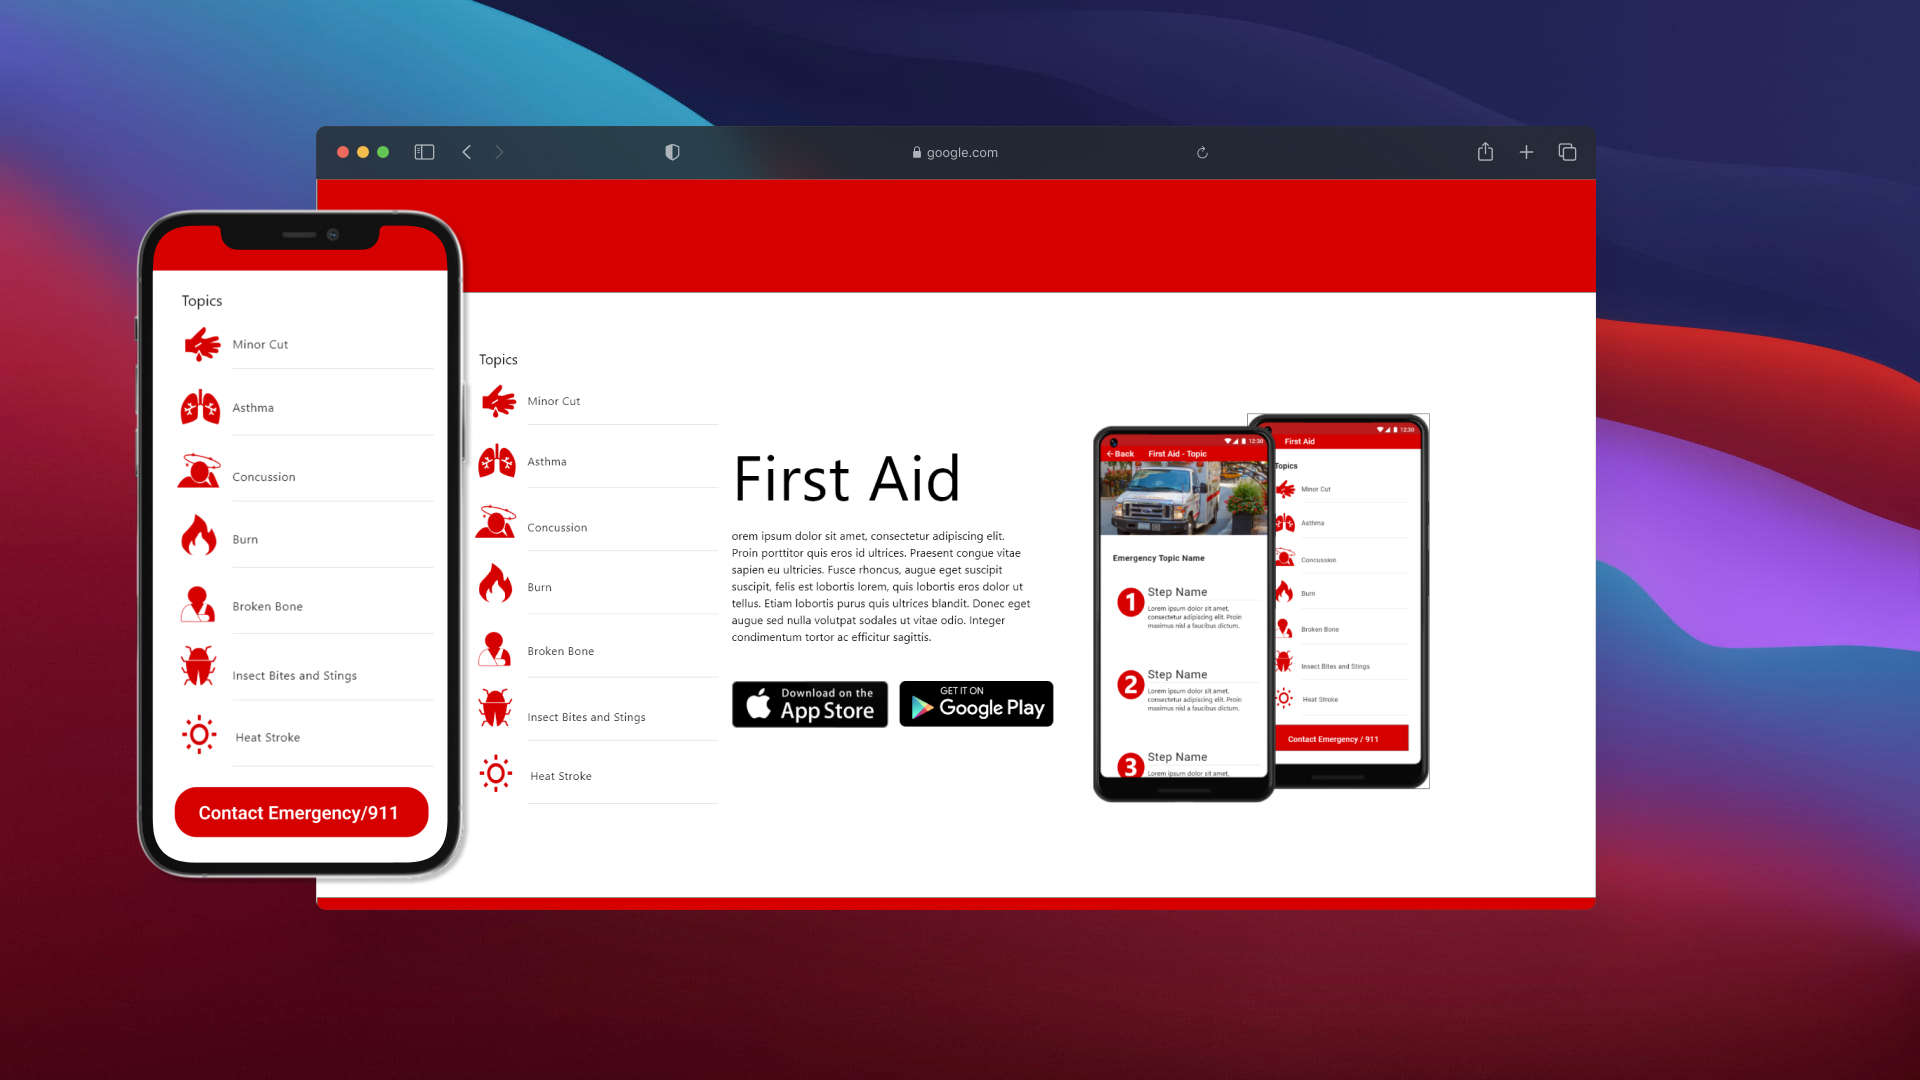 The First Aid App